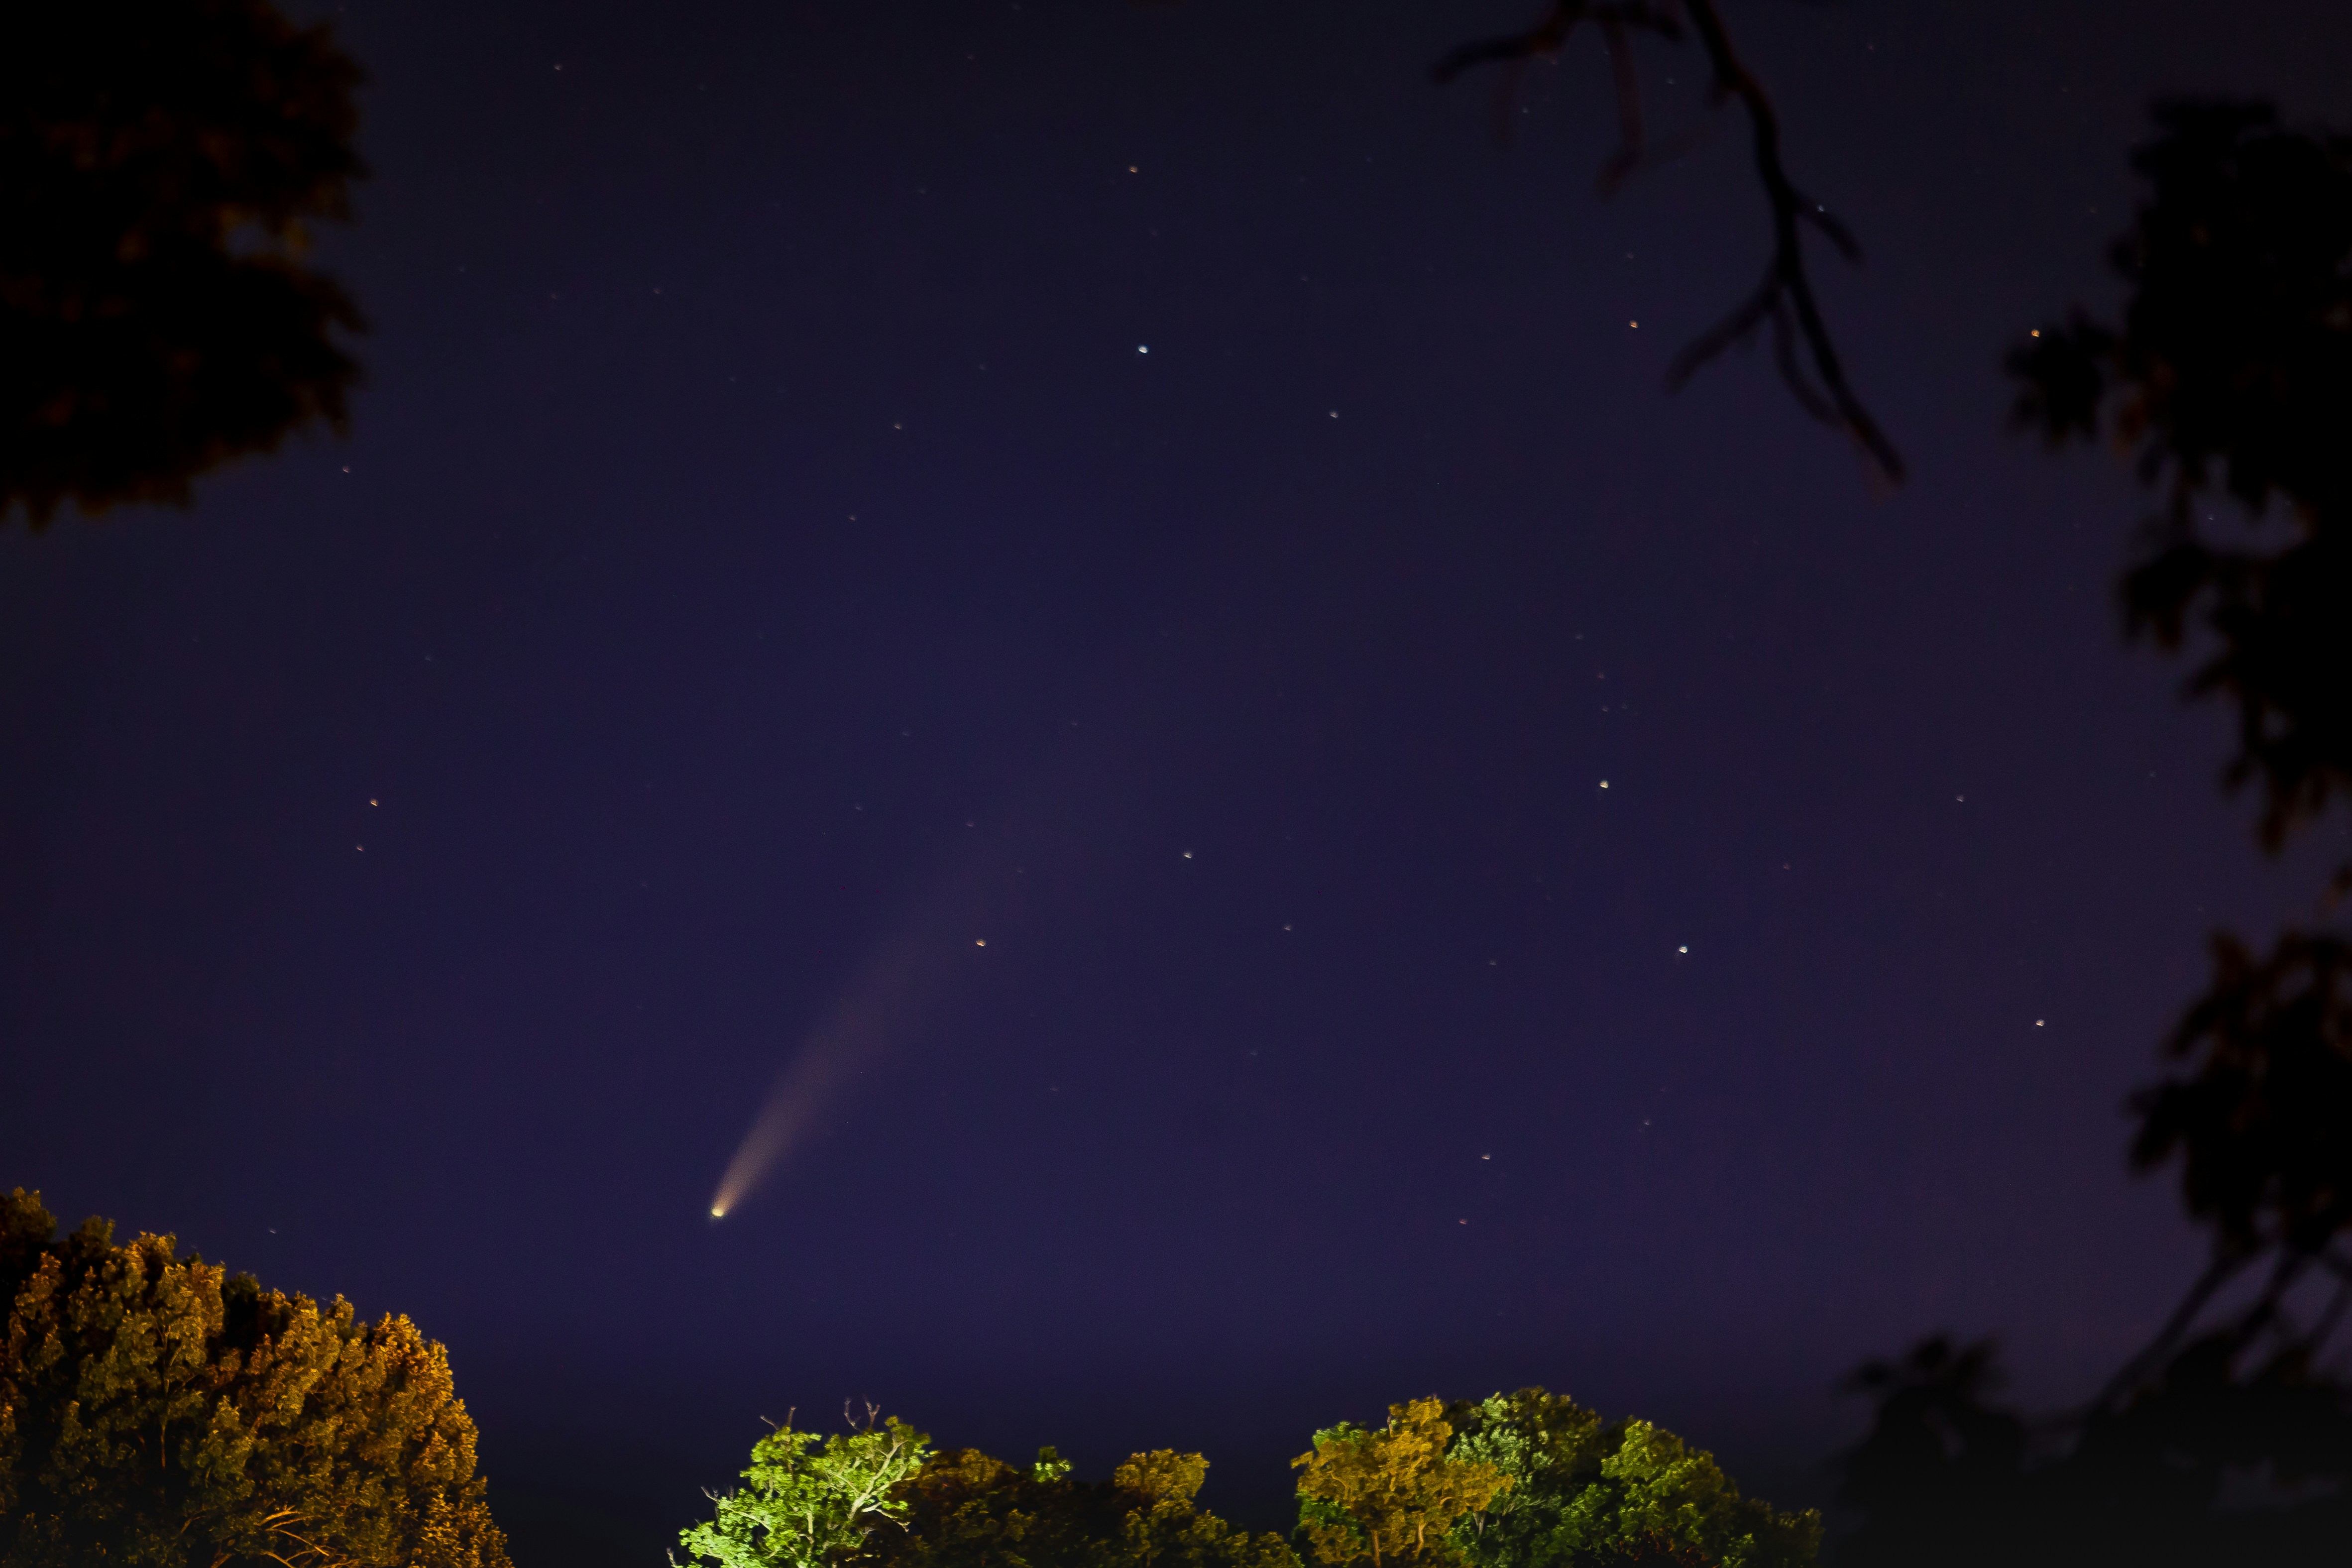 Have you ever seen a comet?